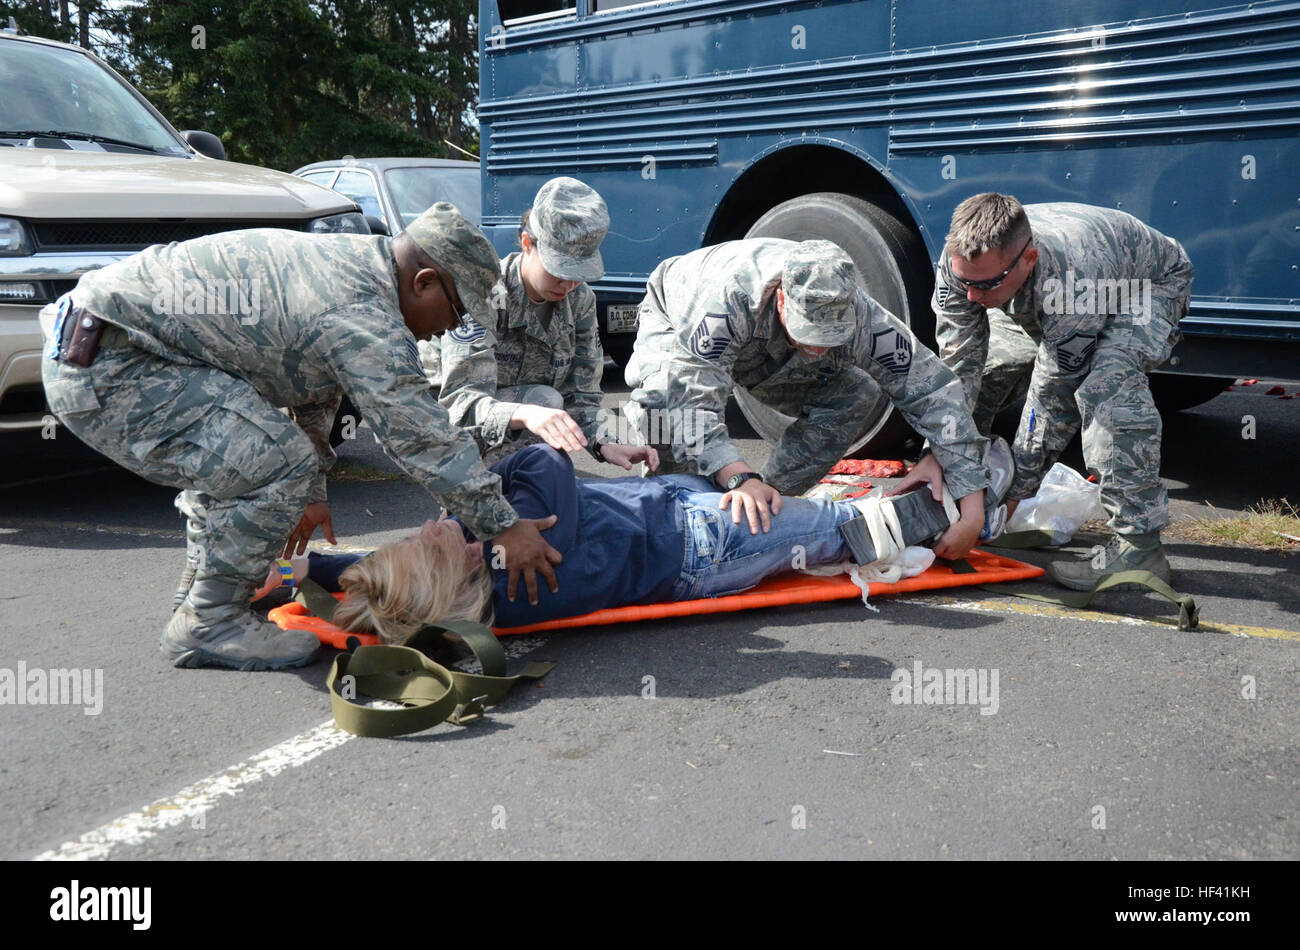 Medics with the 194th Medical Group move a role playing victim onto a liter carrier for transportation to a treatment facility as part of a massive casualty care exercise at Joint Base Lewis-McChord on June 8, 2016 as part of Cascadia Rising. The casualty care exercise simulated the collapse of an overpass along Interstate 5 onto a bus resulting in multiple injured. Upon arrival airmen with the 194th Medical Group worked quickly to triage patients before transporting them to a simulated medical treatment facility. (U.S. Army National Guard photo by SPC Brianne Kim) Air Guardsmen respond to sim Stock Photo